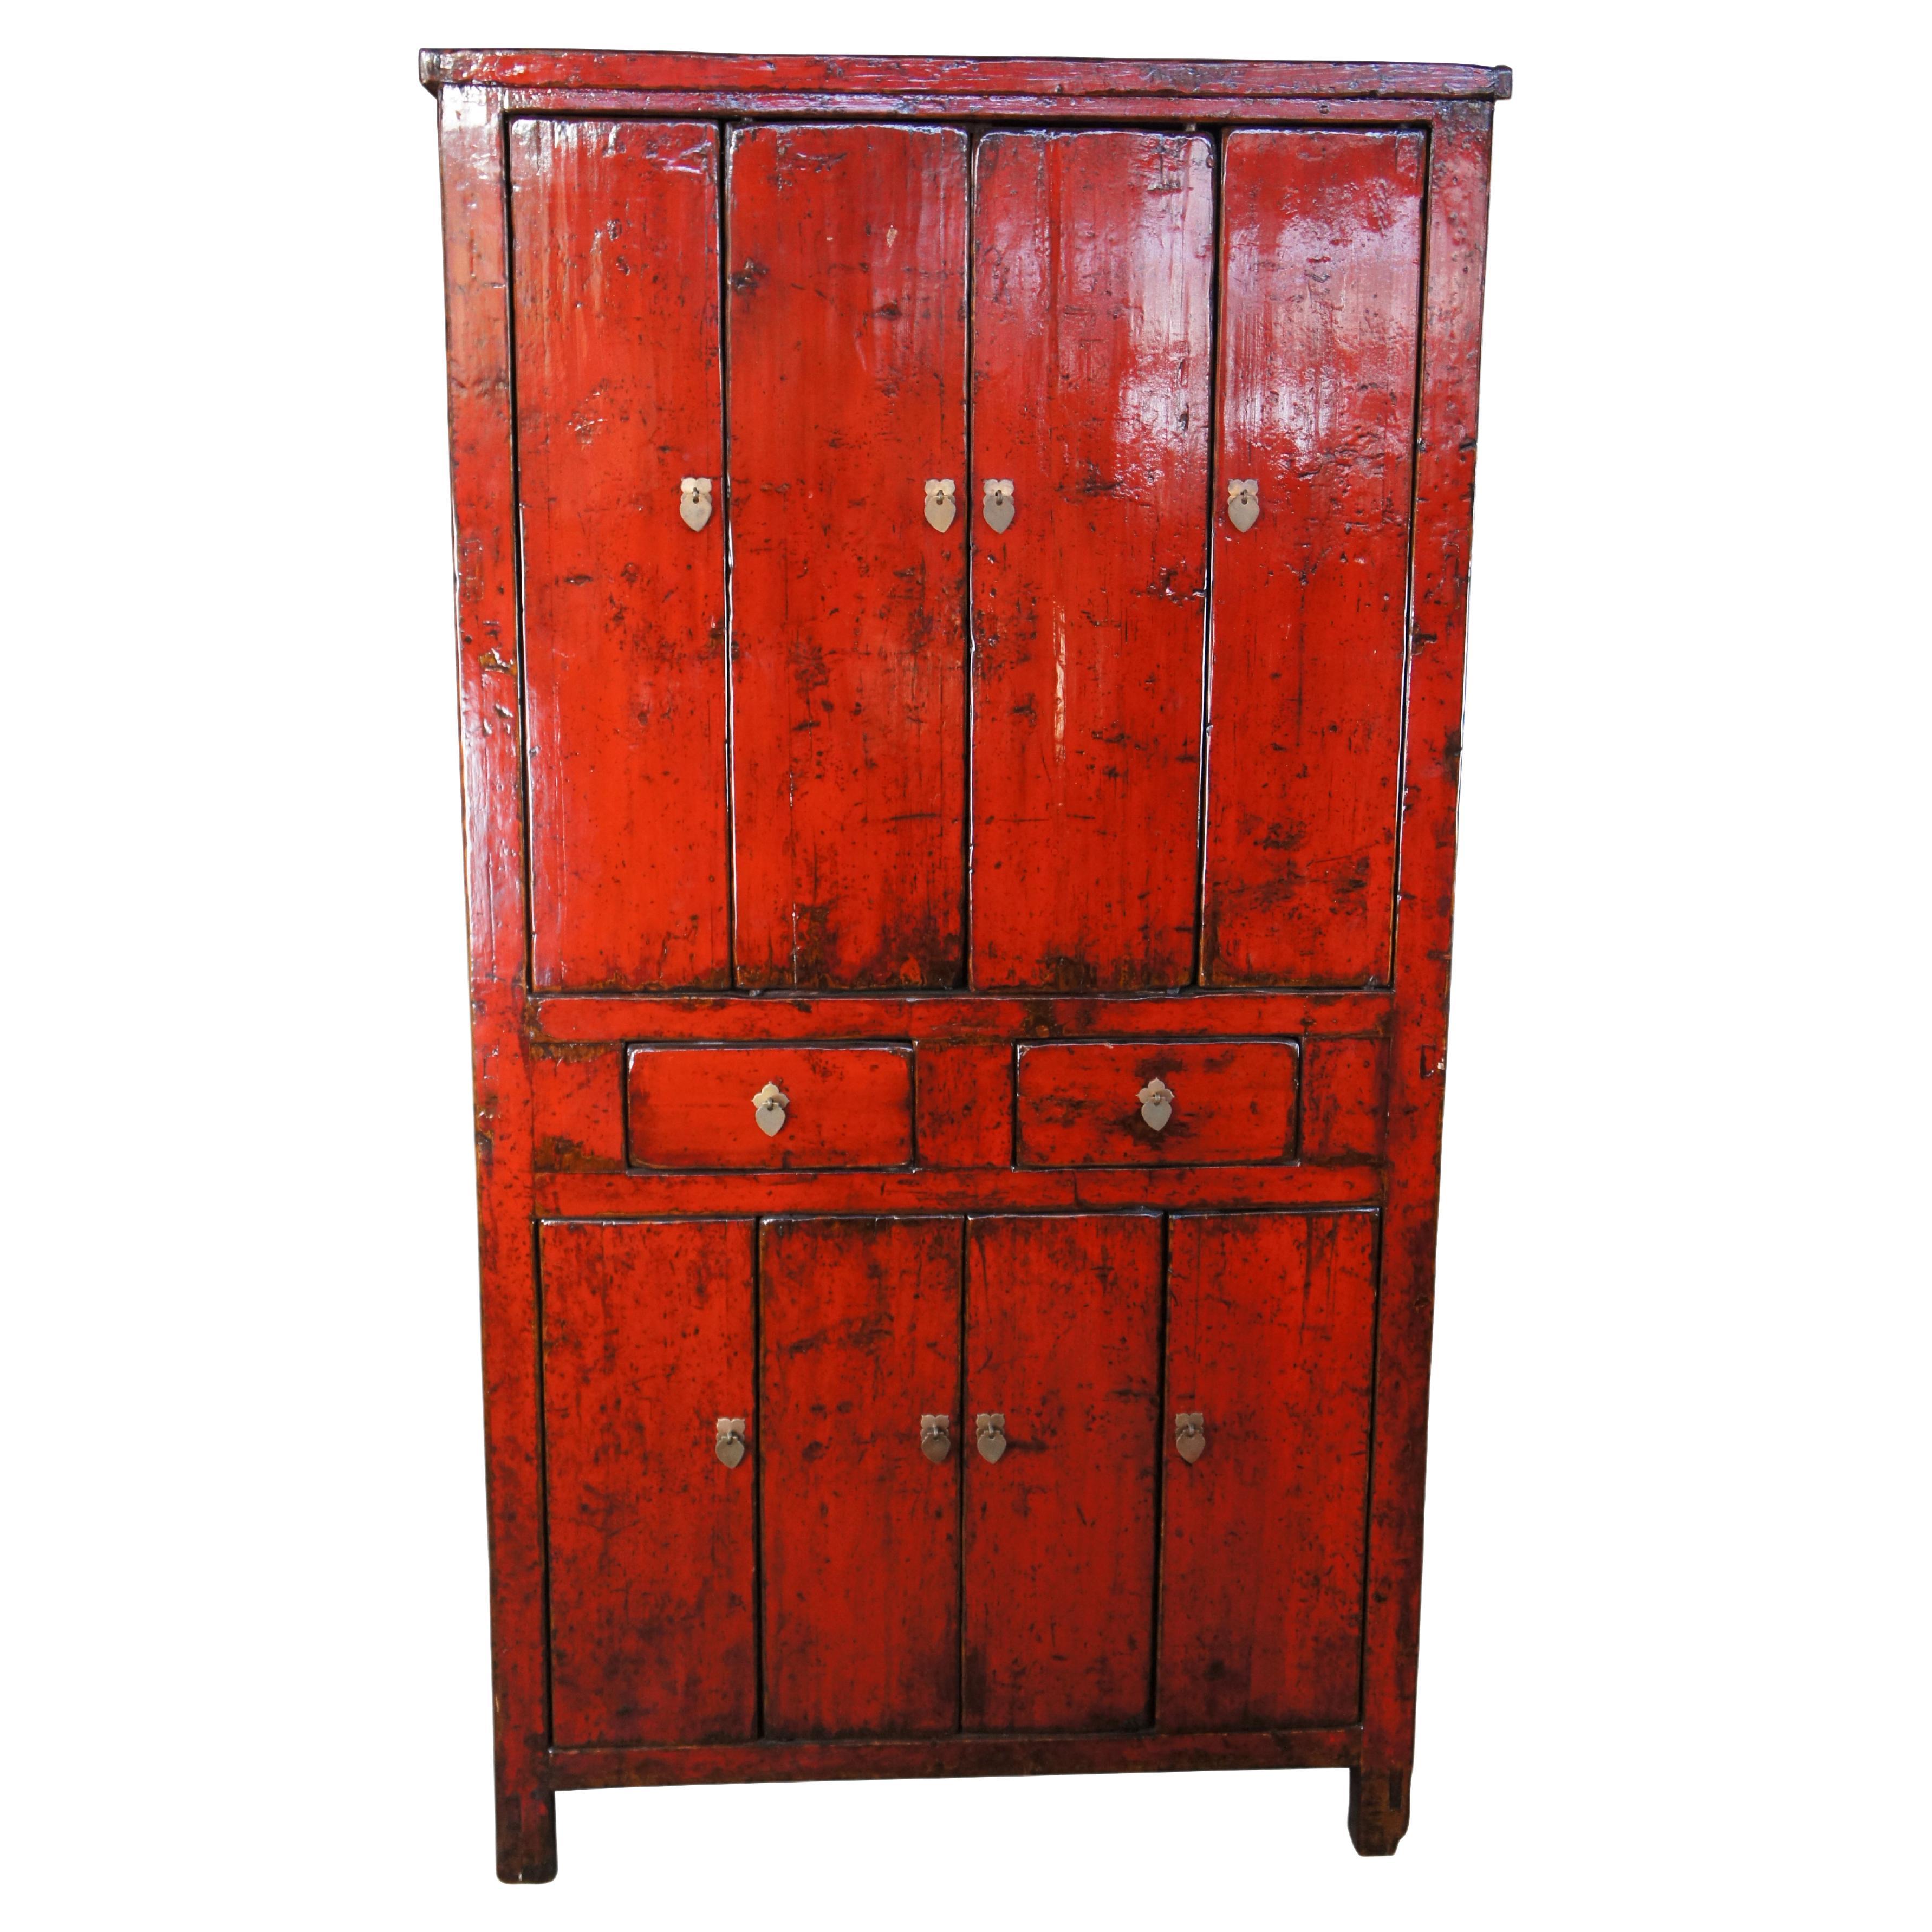 Antique 19th C. Chinese Red Lacquer Elm Armoire Wardrobe Linen Press Cabinet 89" For Sale